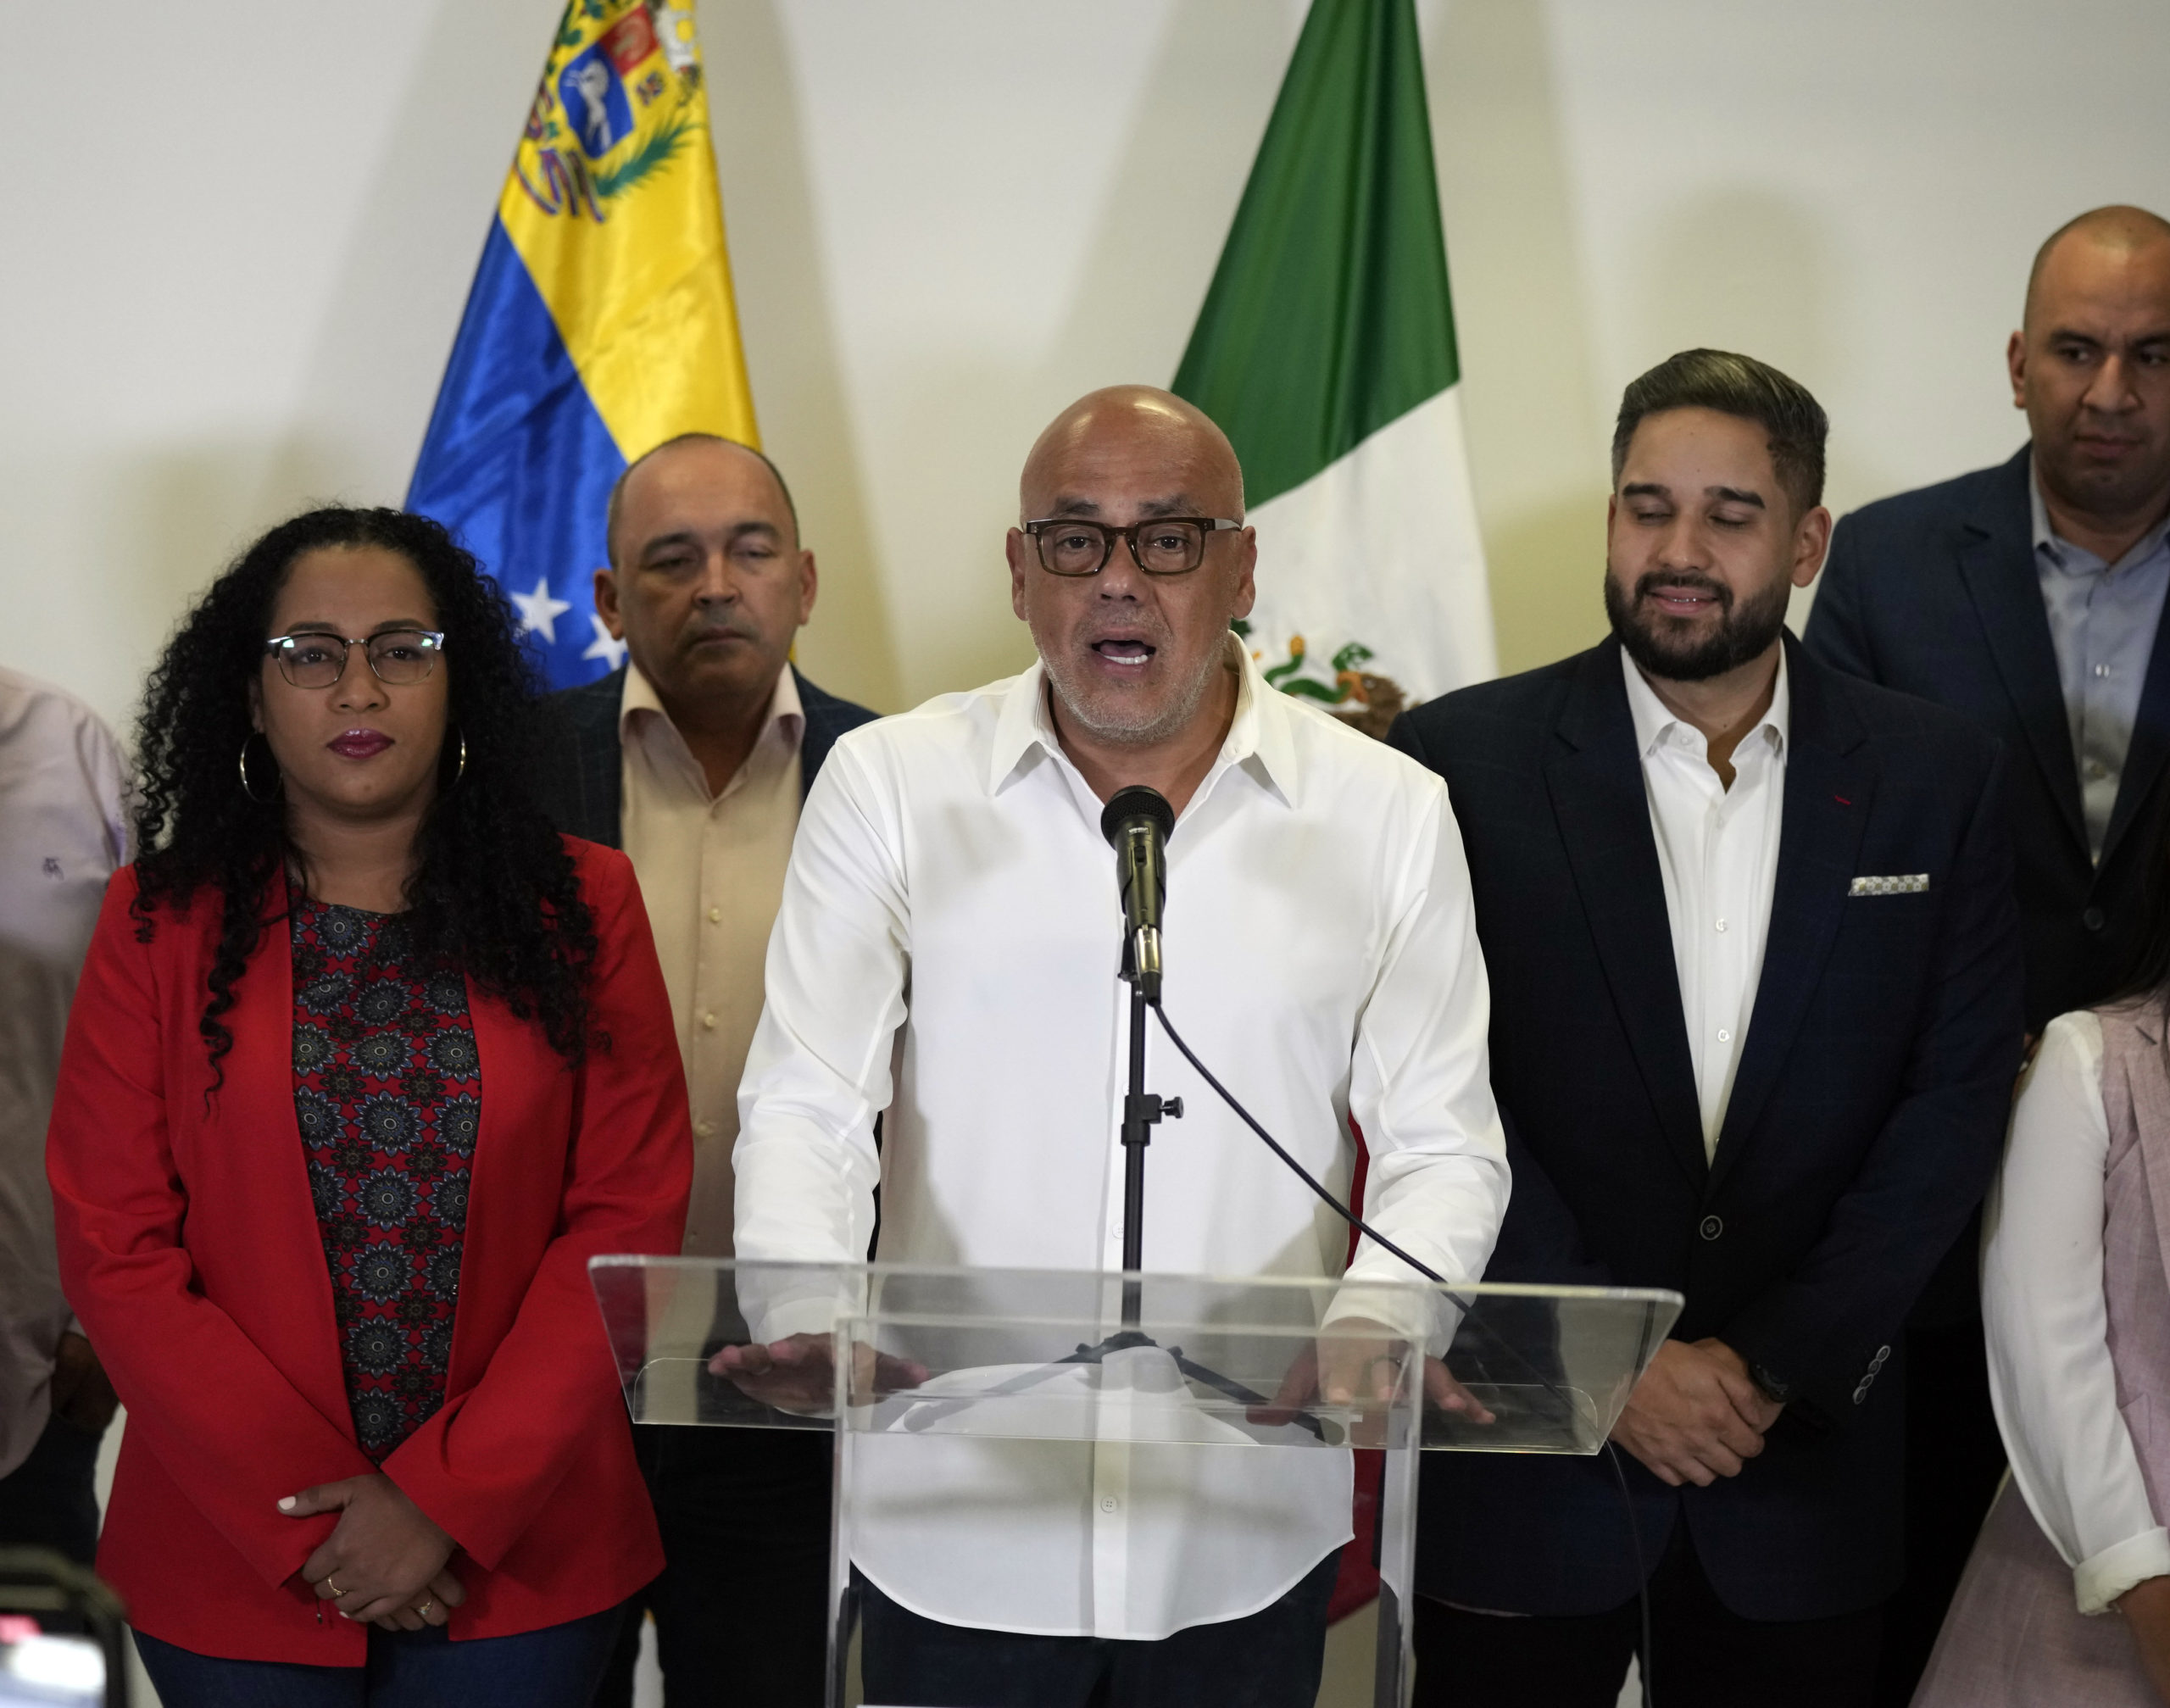 Jorge Rodriguez, center, speaks as part of the Venezuelan government delegation in Benito Juarez International Airport in Mexico City on Friday.